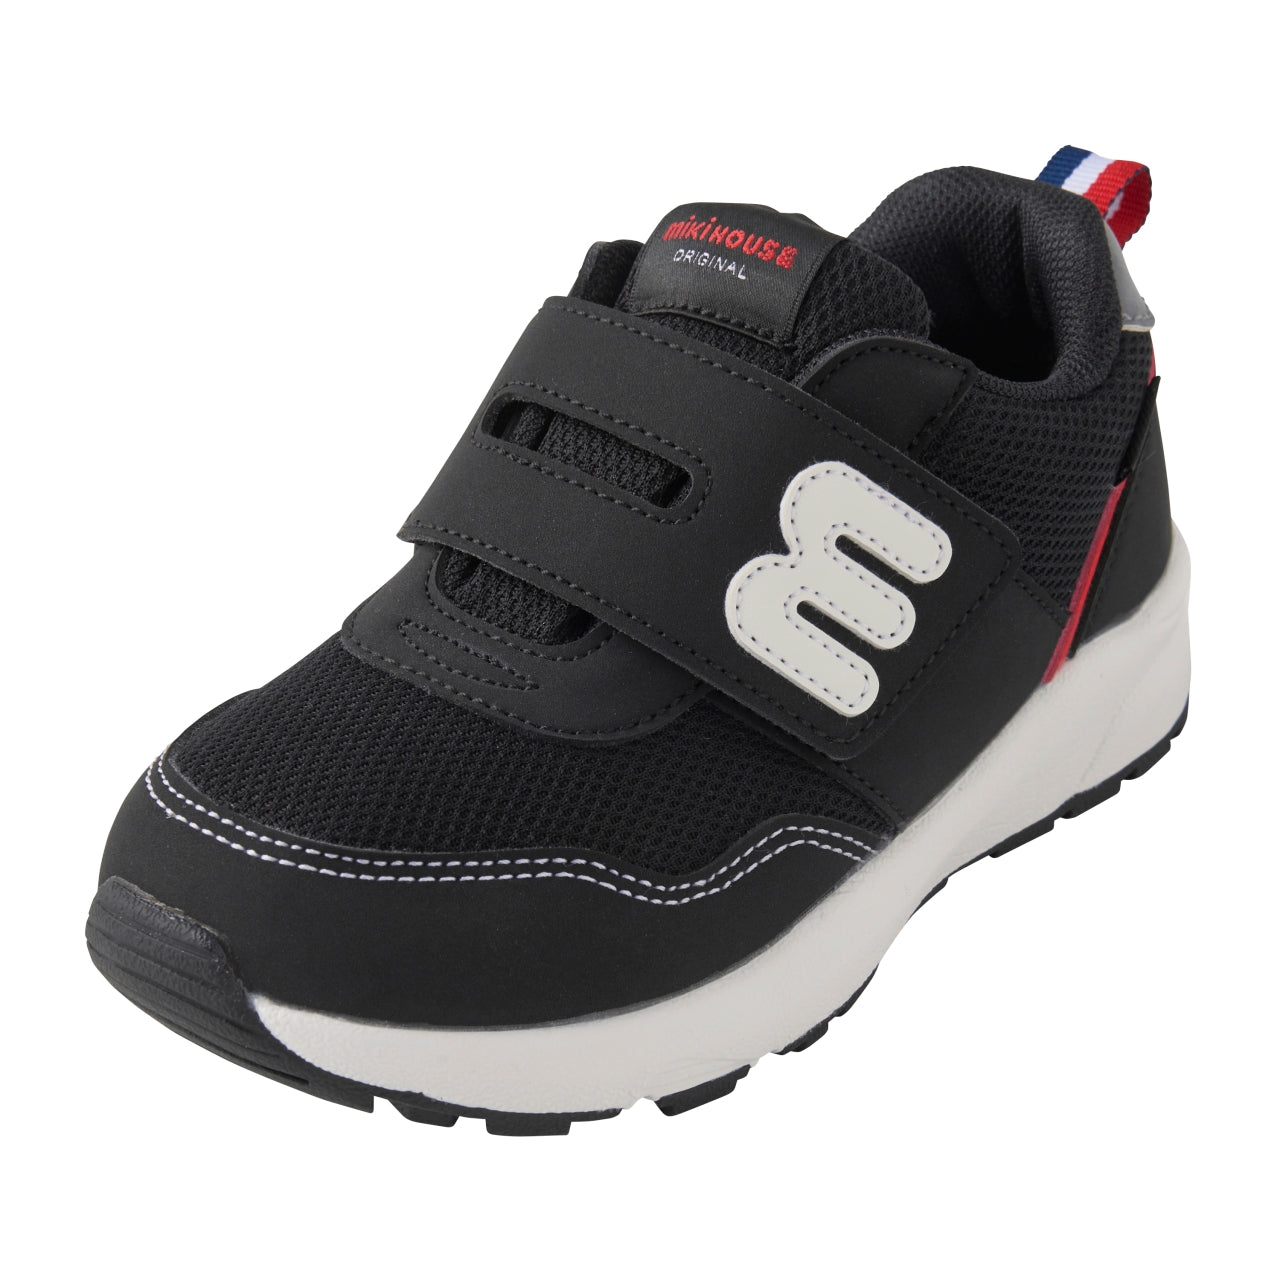 Classic Faux Leather mLogo Sneakers for Kids (Water resistant)